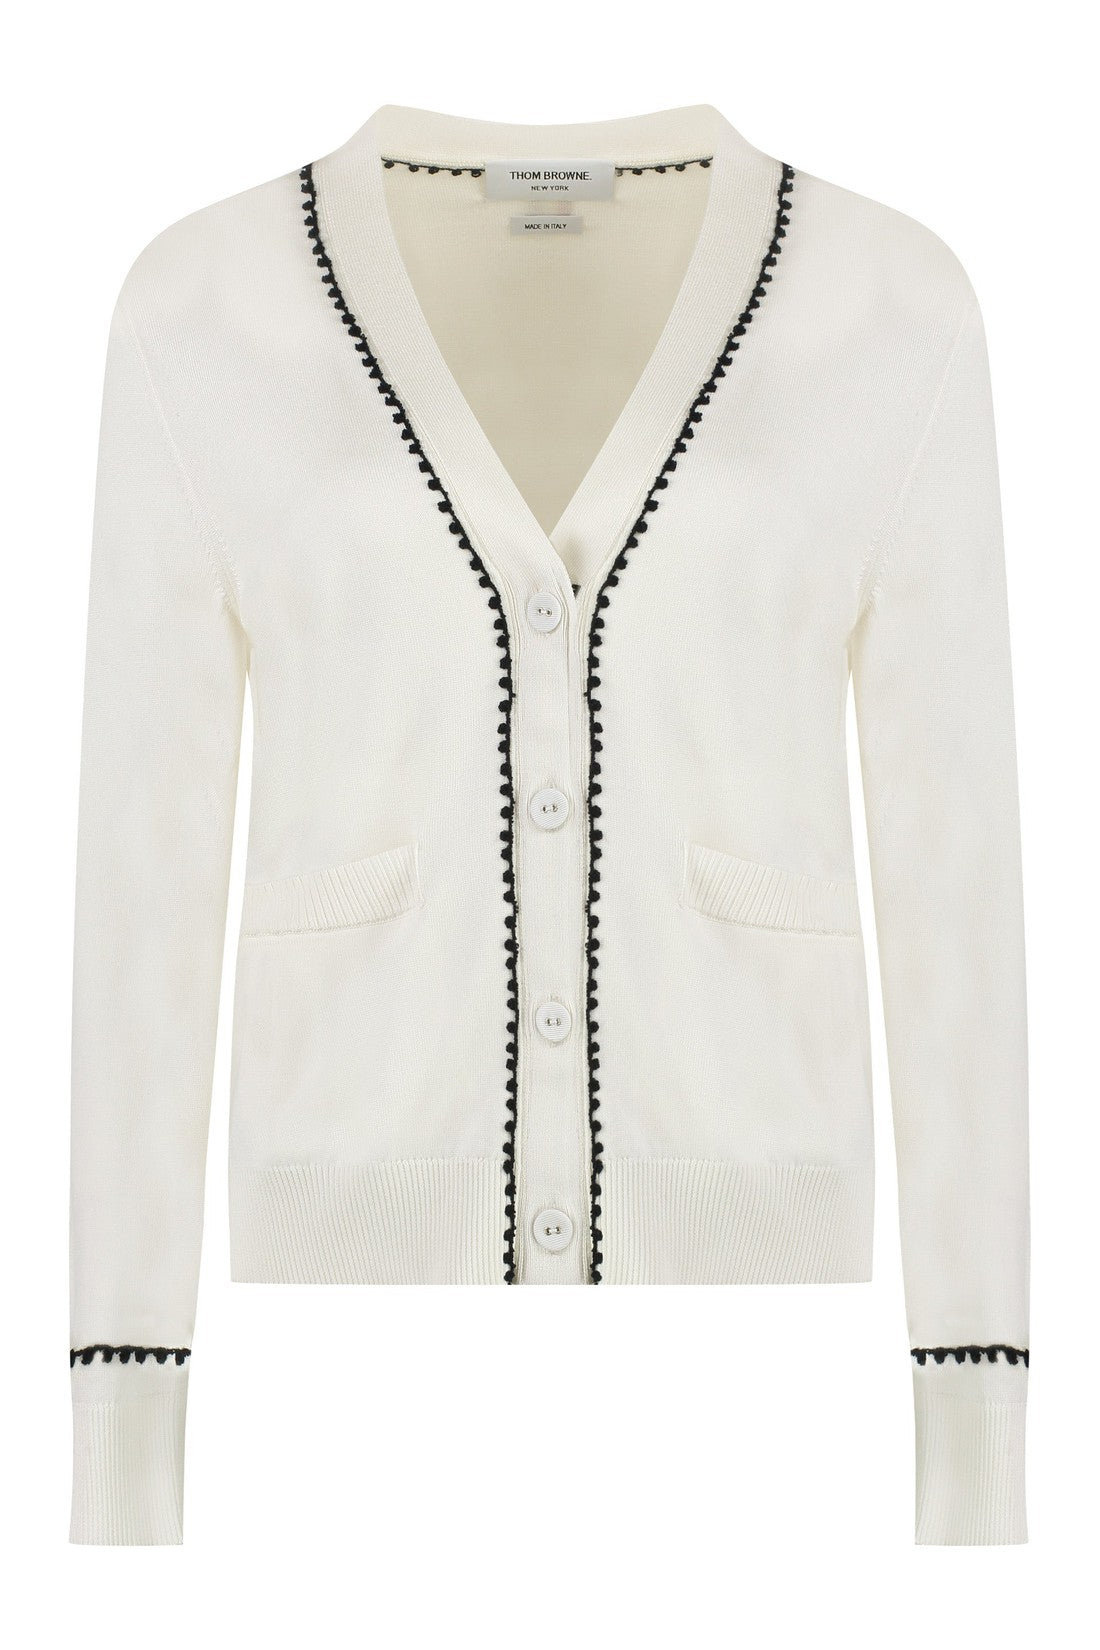 Thom Browne-OUTLET-SALE-Cardigan in silk and cotton-ARCHIVIST